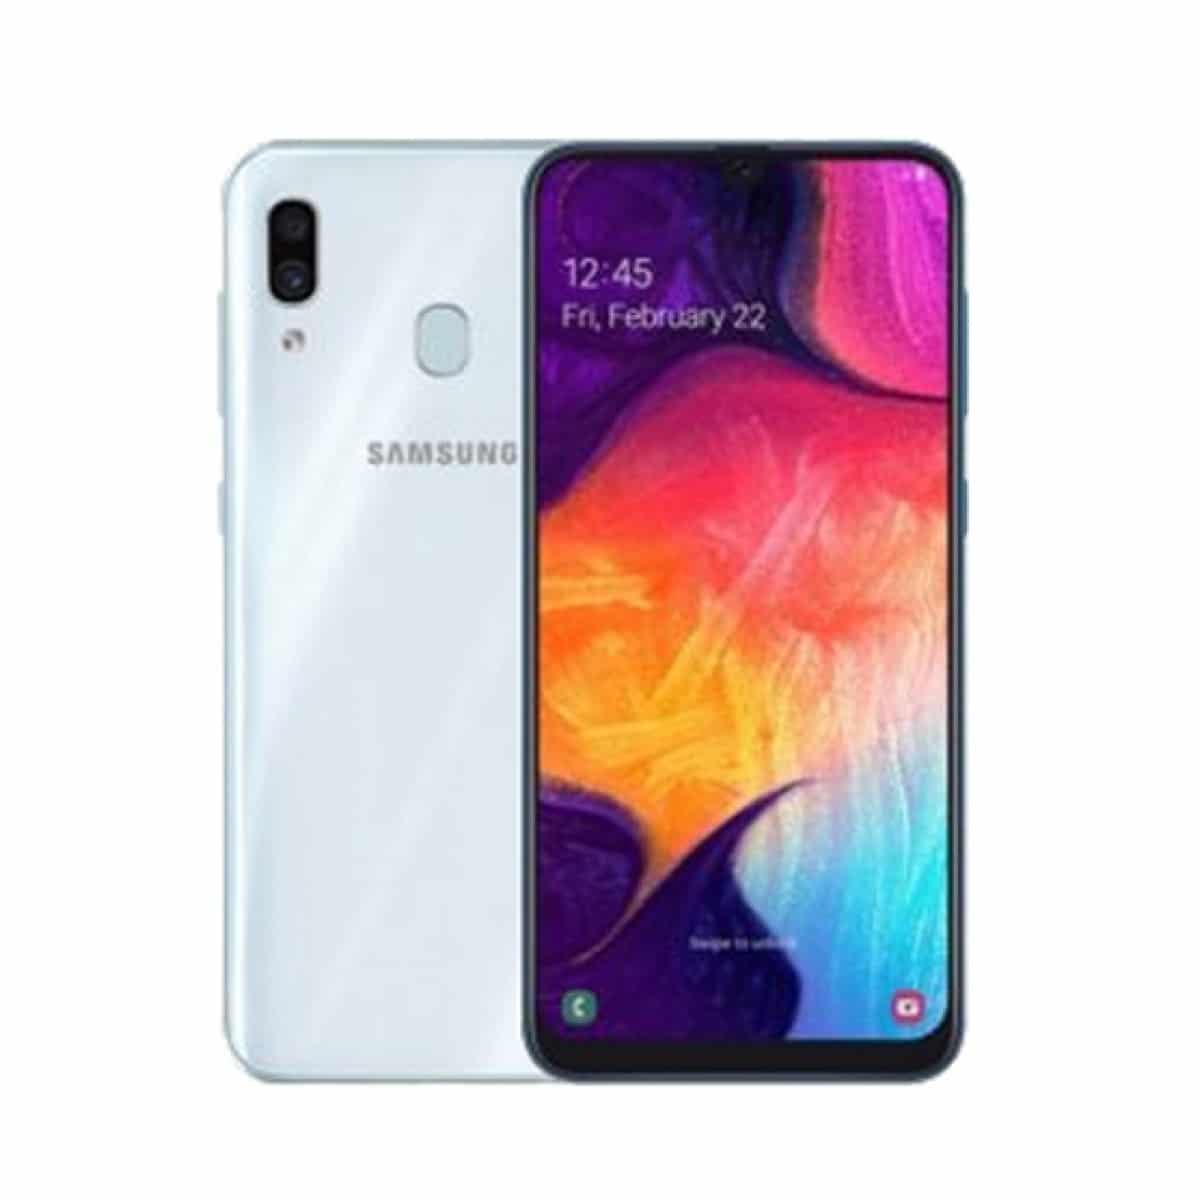 Samsung a30 price in pakistan